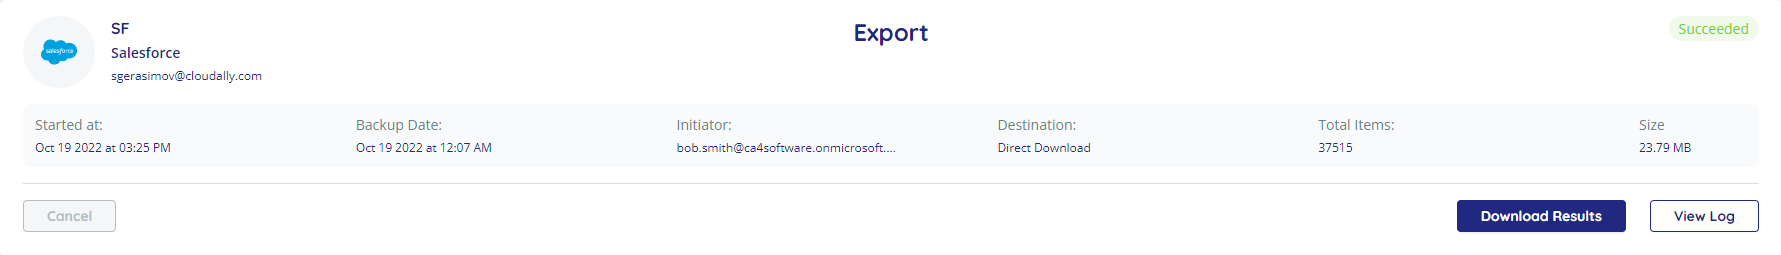 Jobs page, export job, with Download Results button higlighted